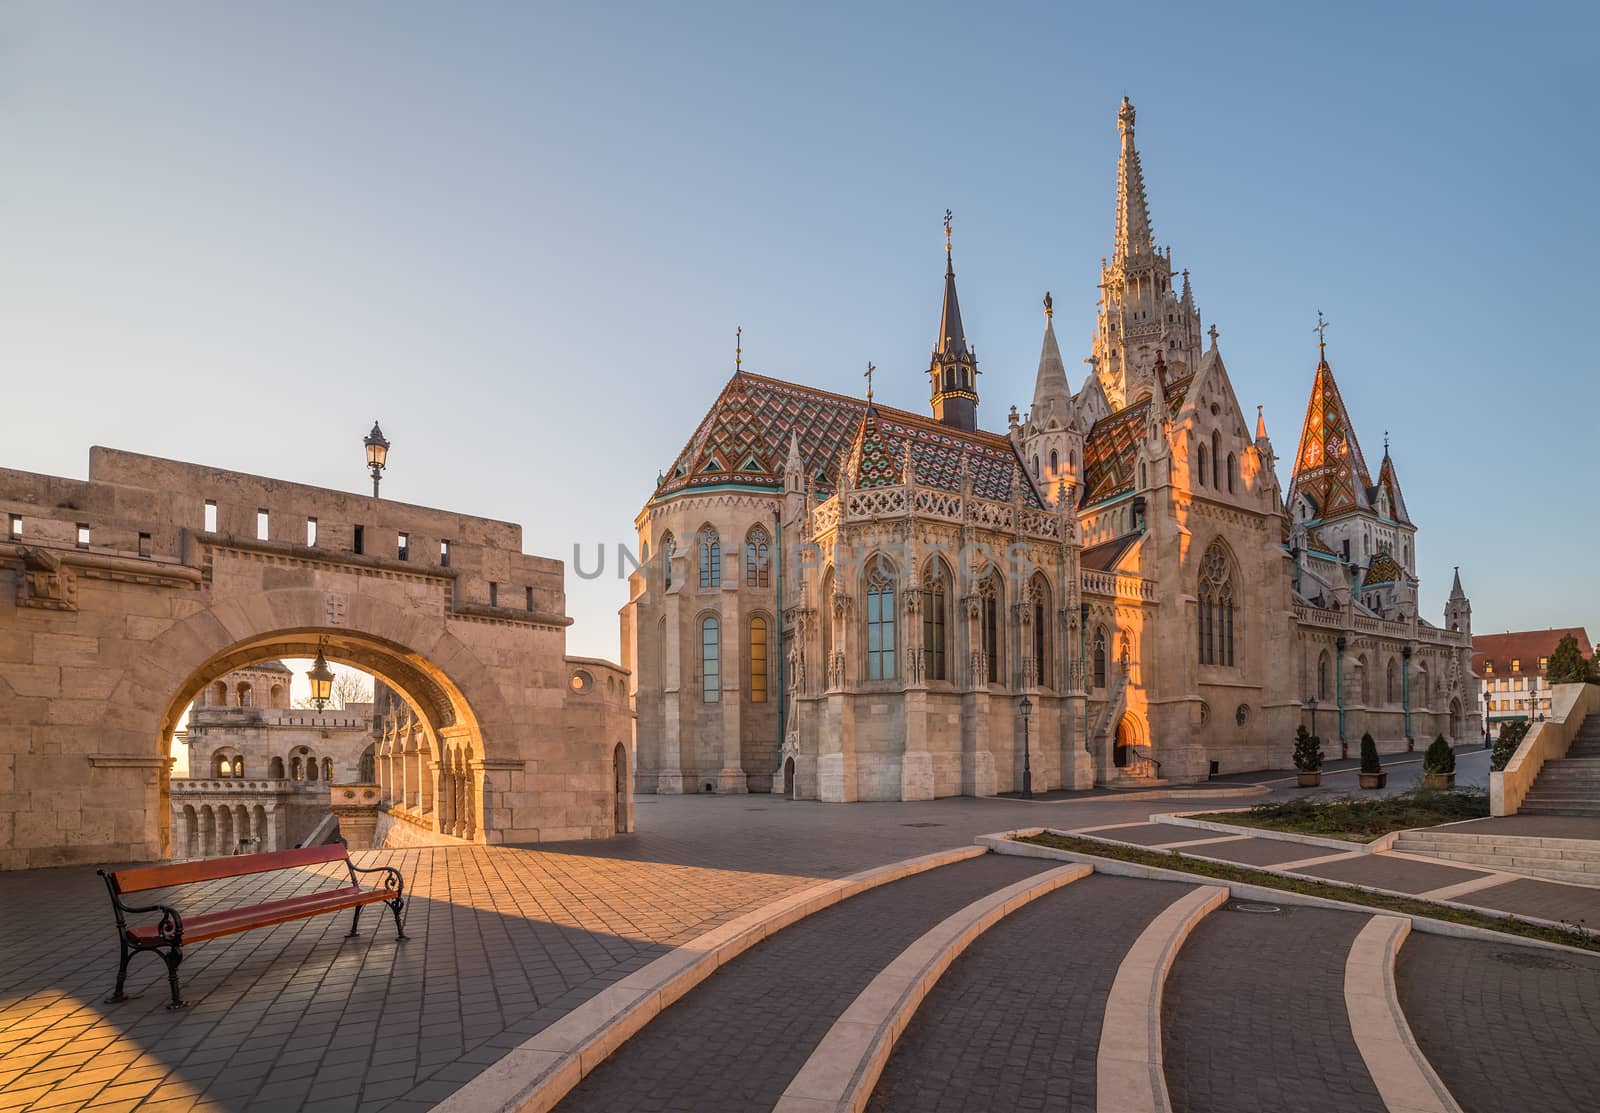 Roman Catholic Matthias Church and Fisherman's Bastion in Early Morning in Budapest, Hungary